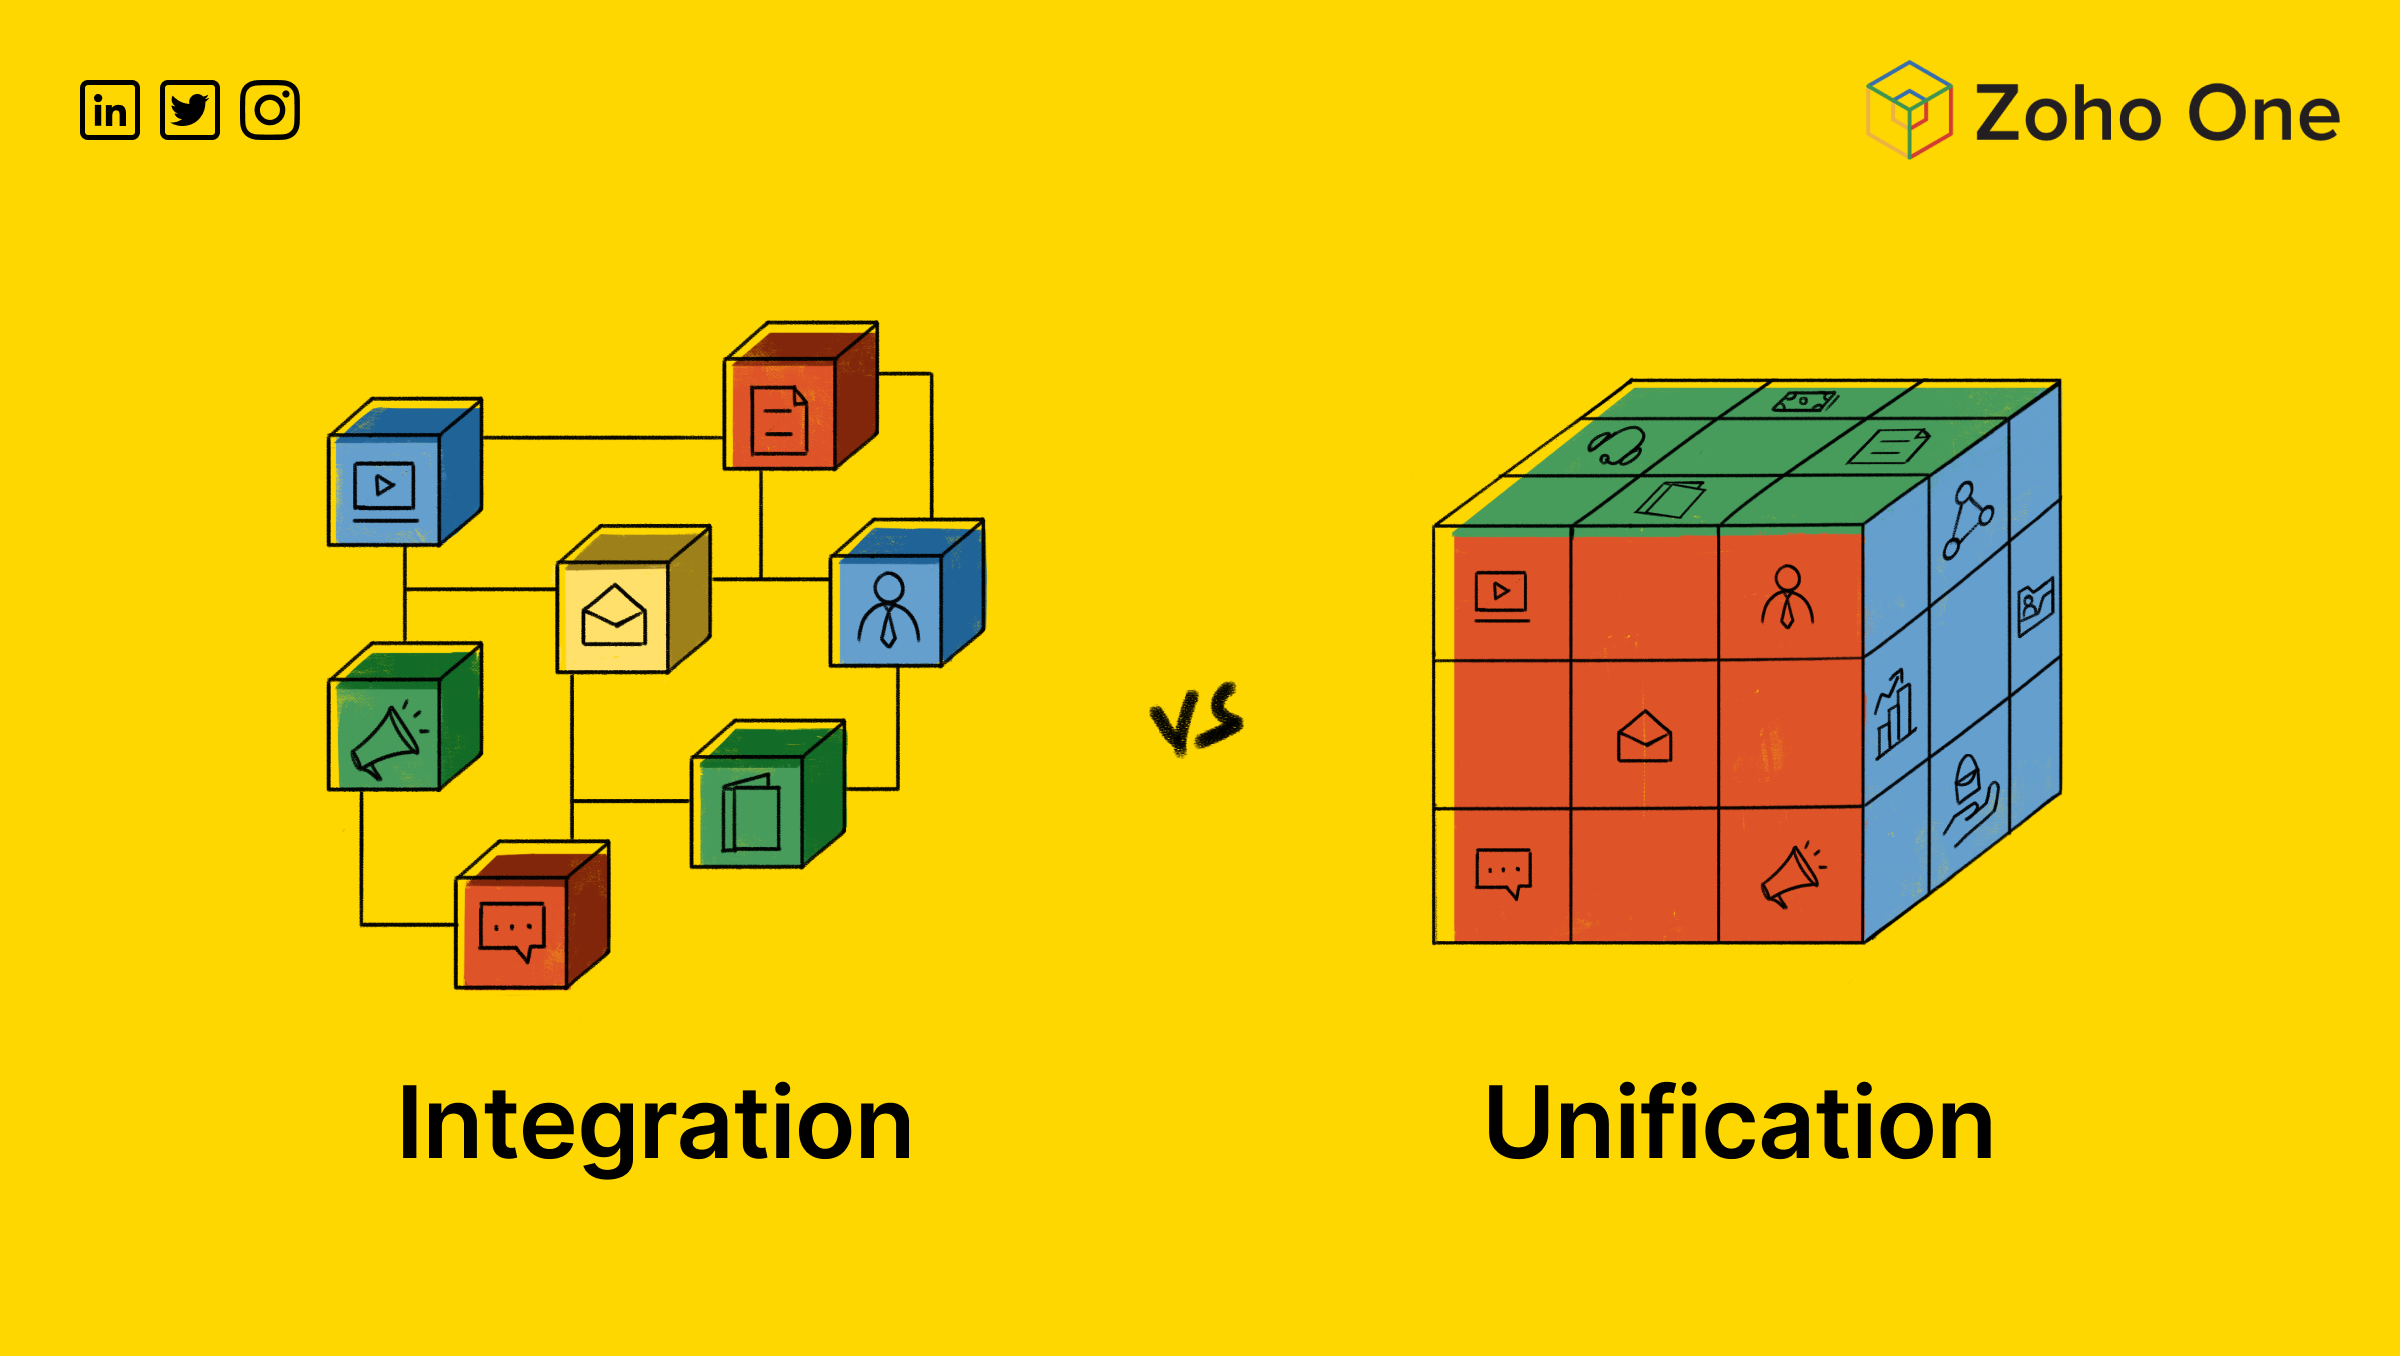 Building an interconnected ecosystem: Unification vs. Integration